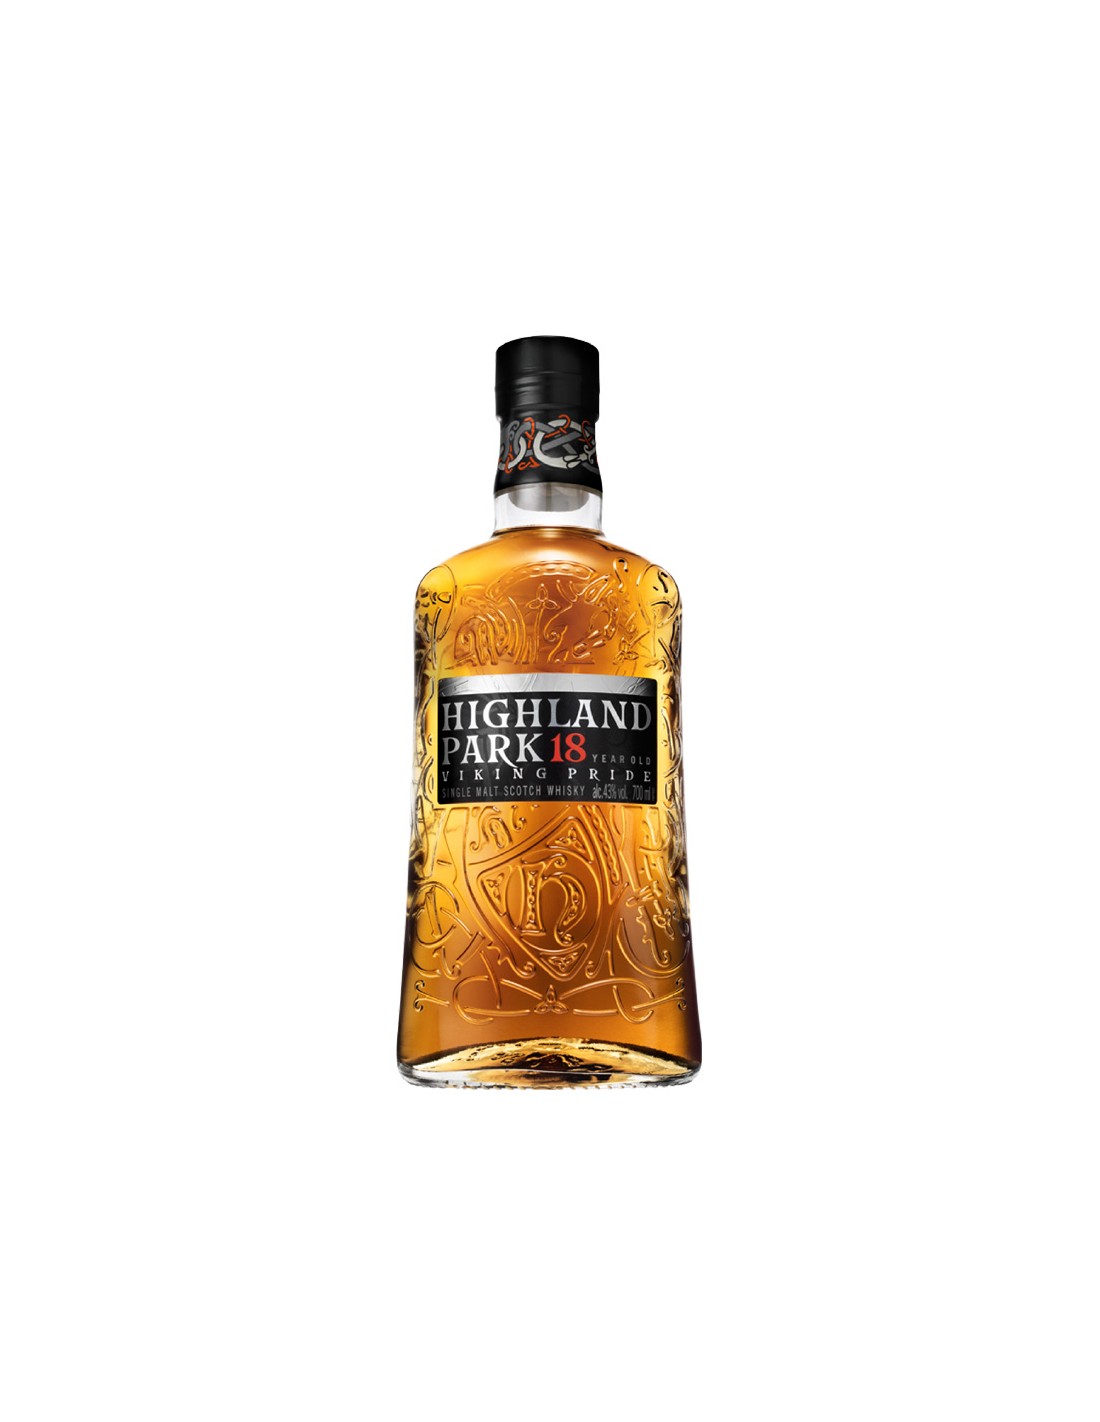 Highland Park 18 Years Old 70cl